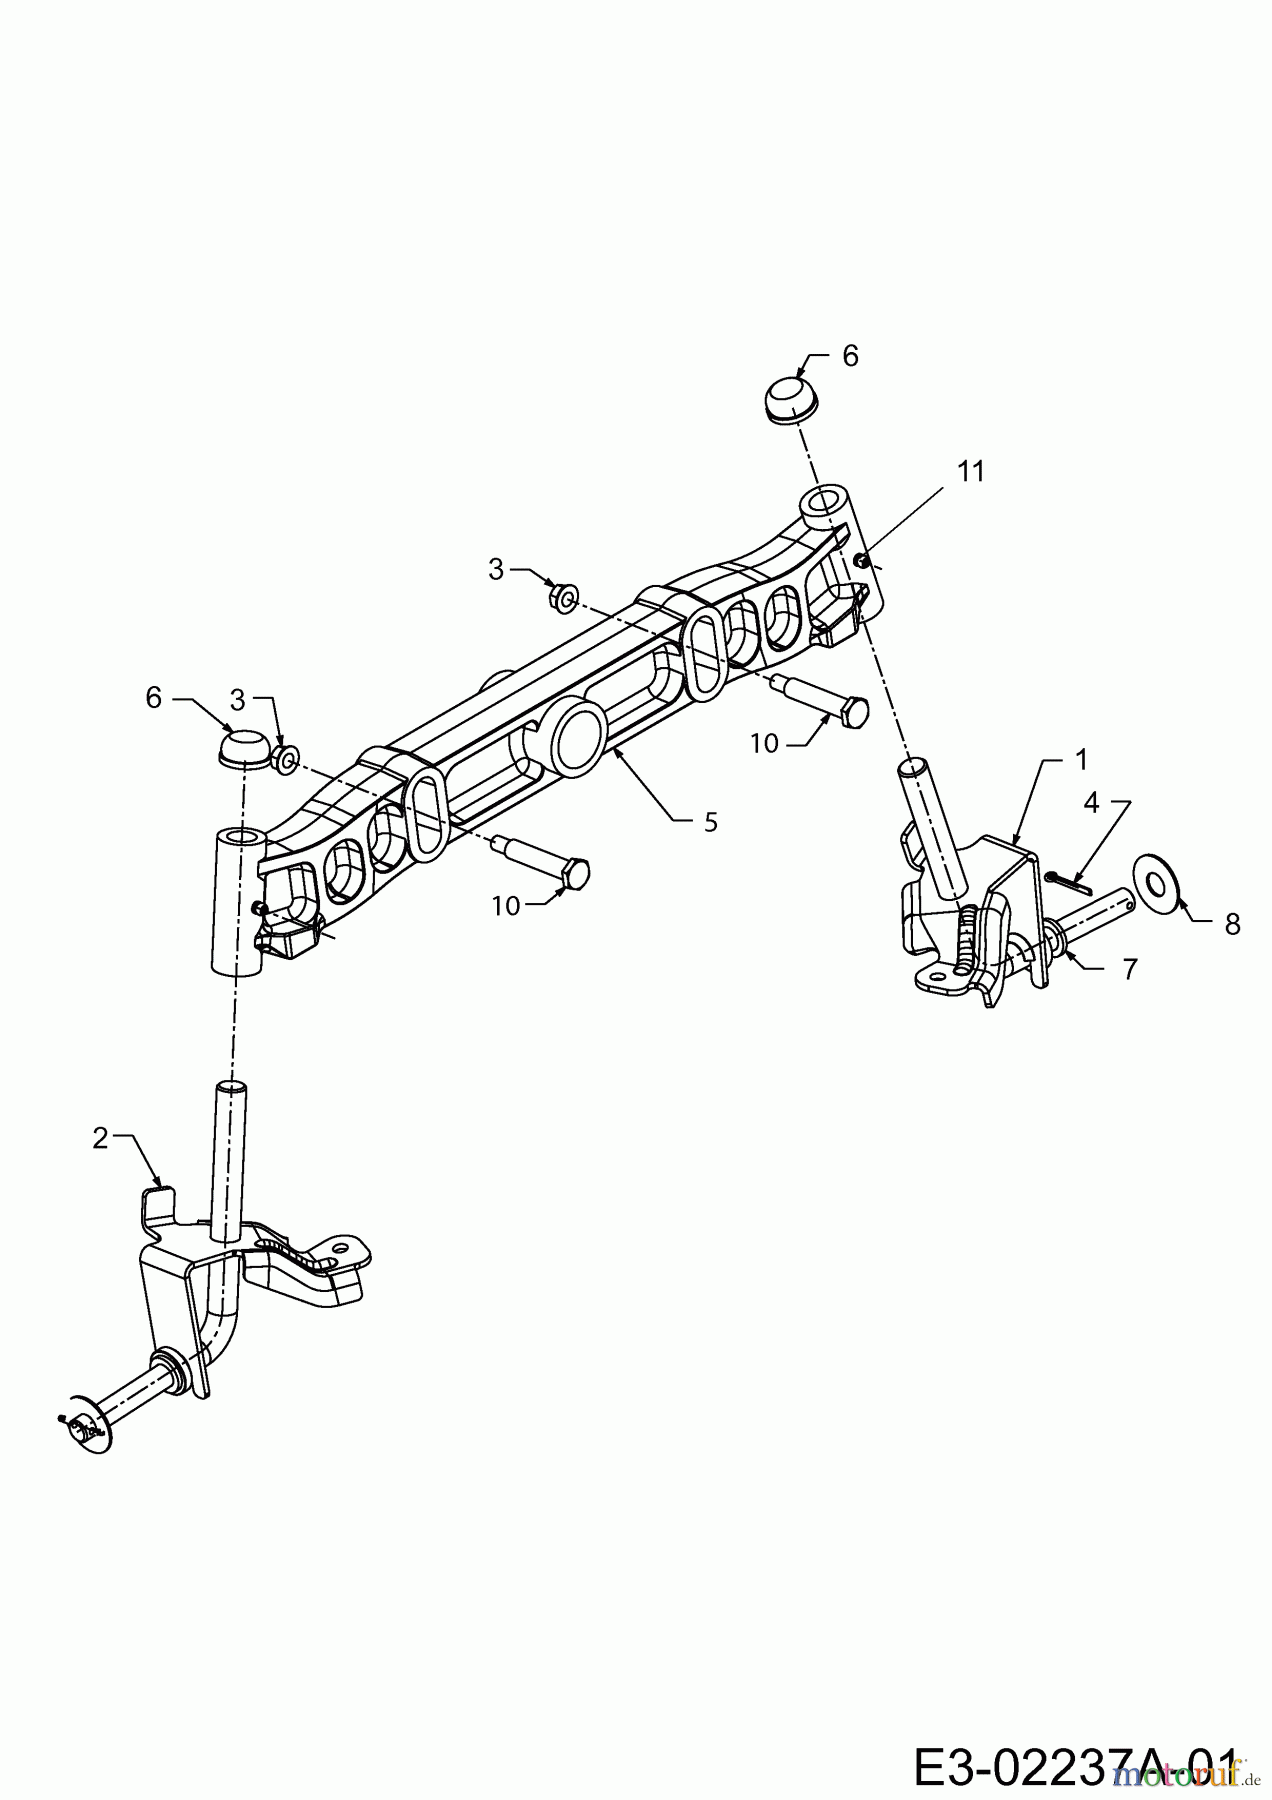  Gutbrod Lawn tractors Sprint SLX 117 S 13AT606H690  (2000) Front axle